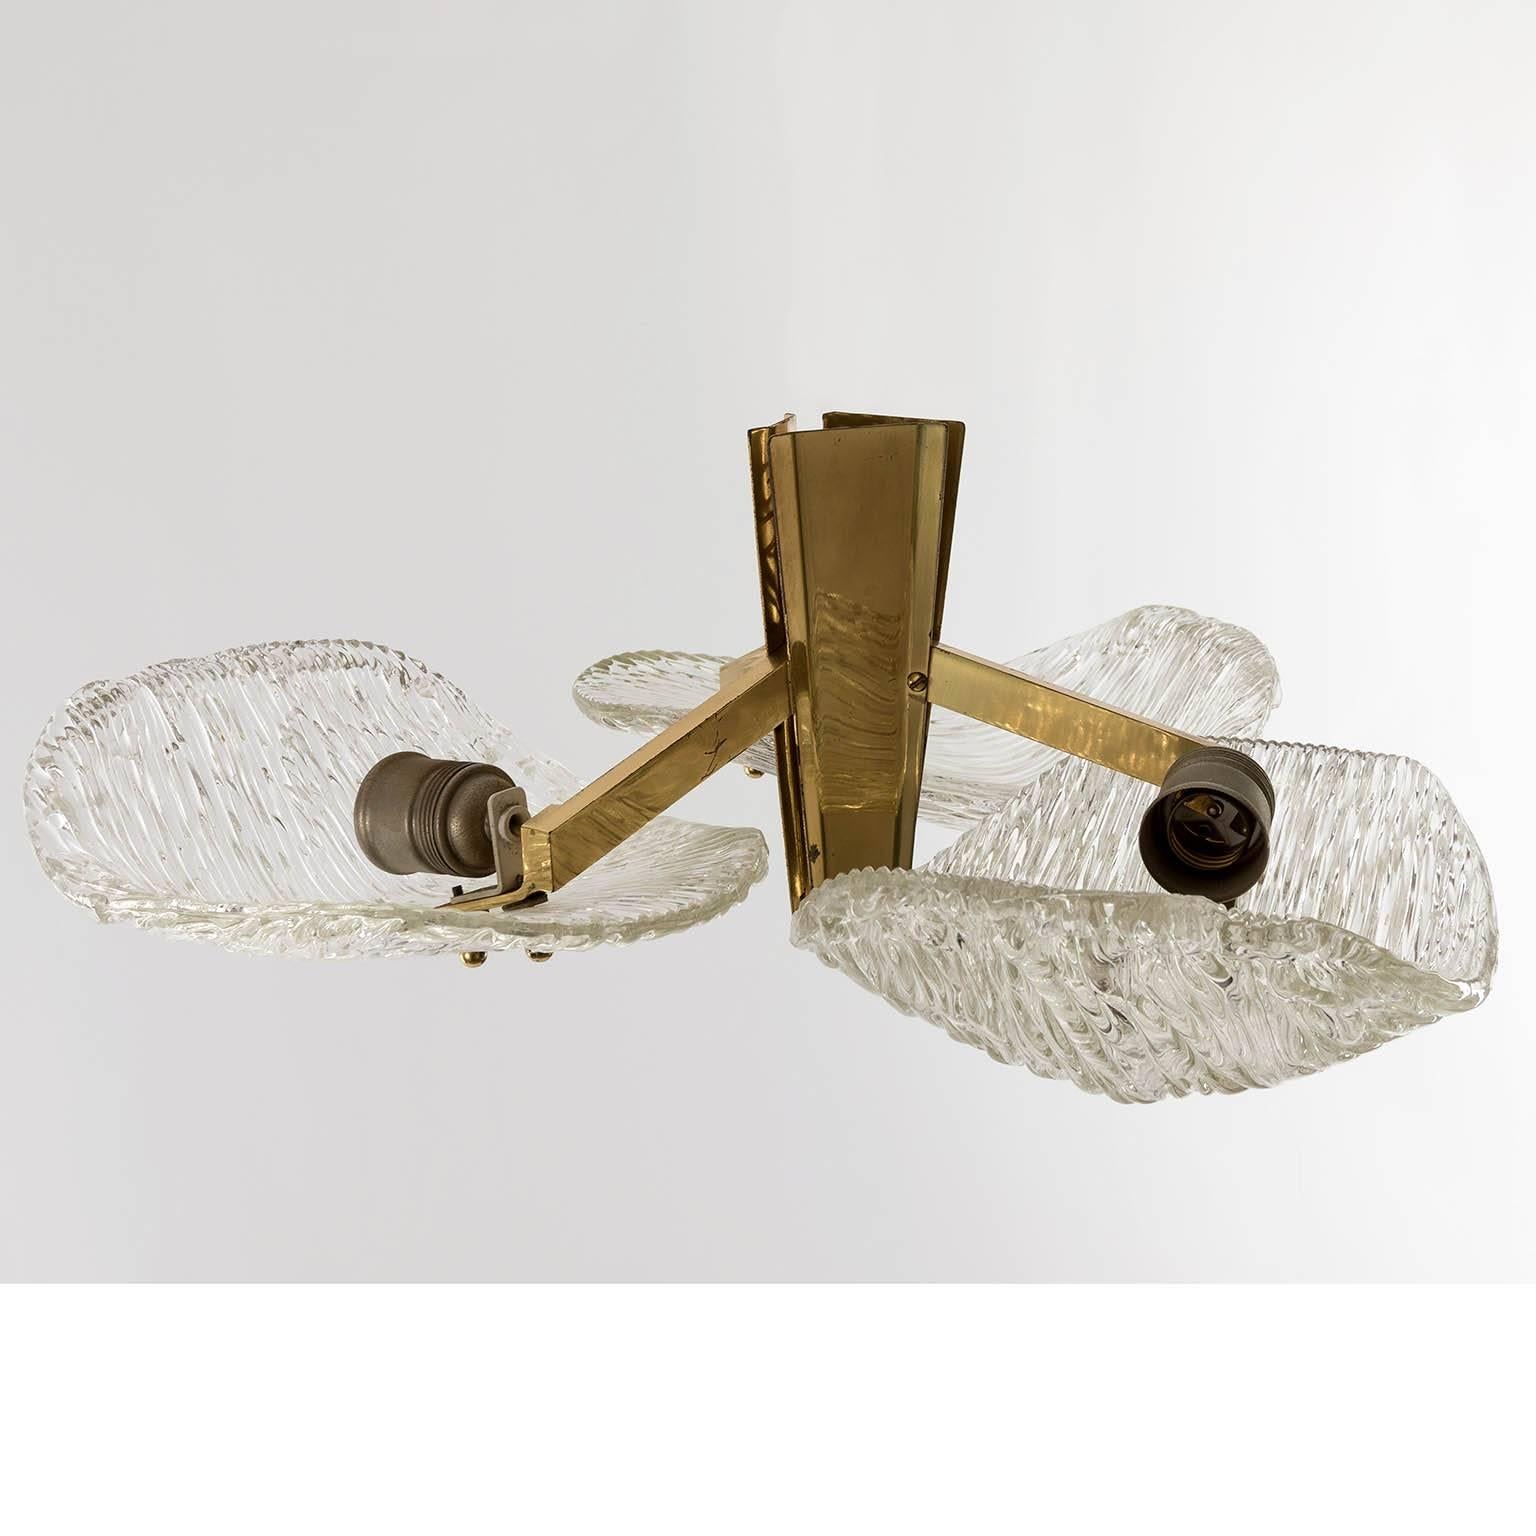 A beautiful ceiling light fixture model 'Trivon' no. 5209 by J.T. Kalmar, Austria, manufactured in Mid-Century, circa 1960 (late 1950s-early 1960s). 
It made of brass and pressed textured glass with nice patina on brass. 
Each lamp has three sockets